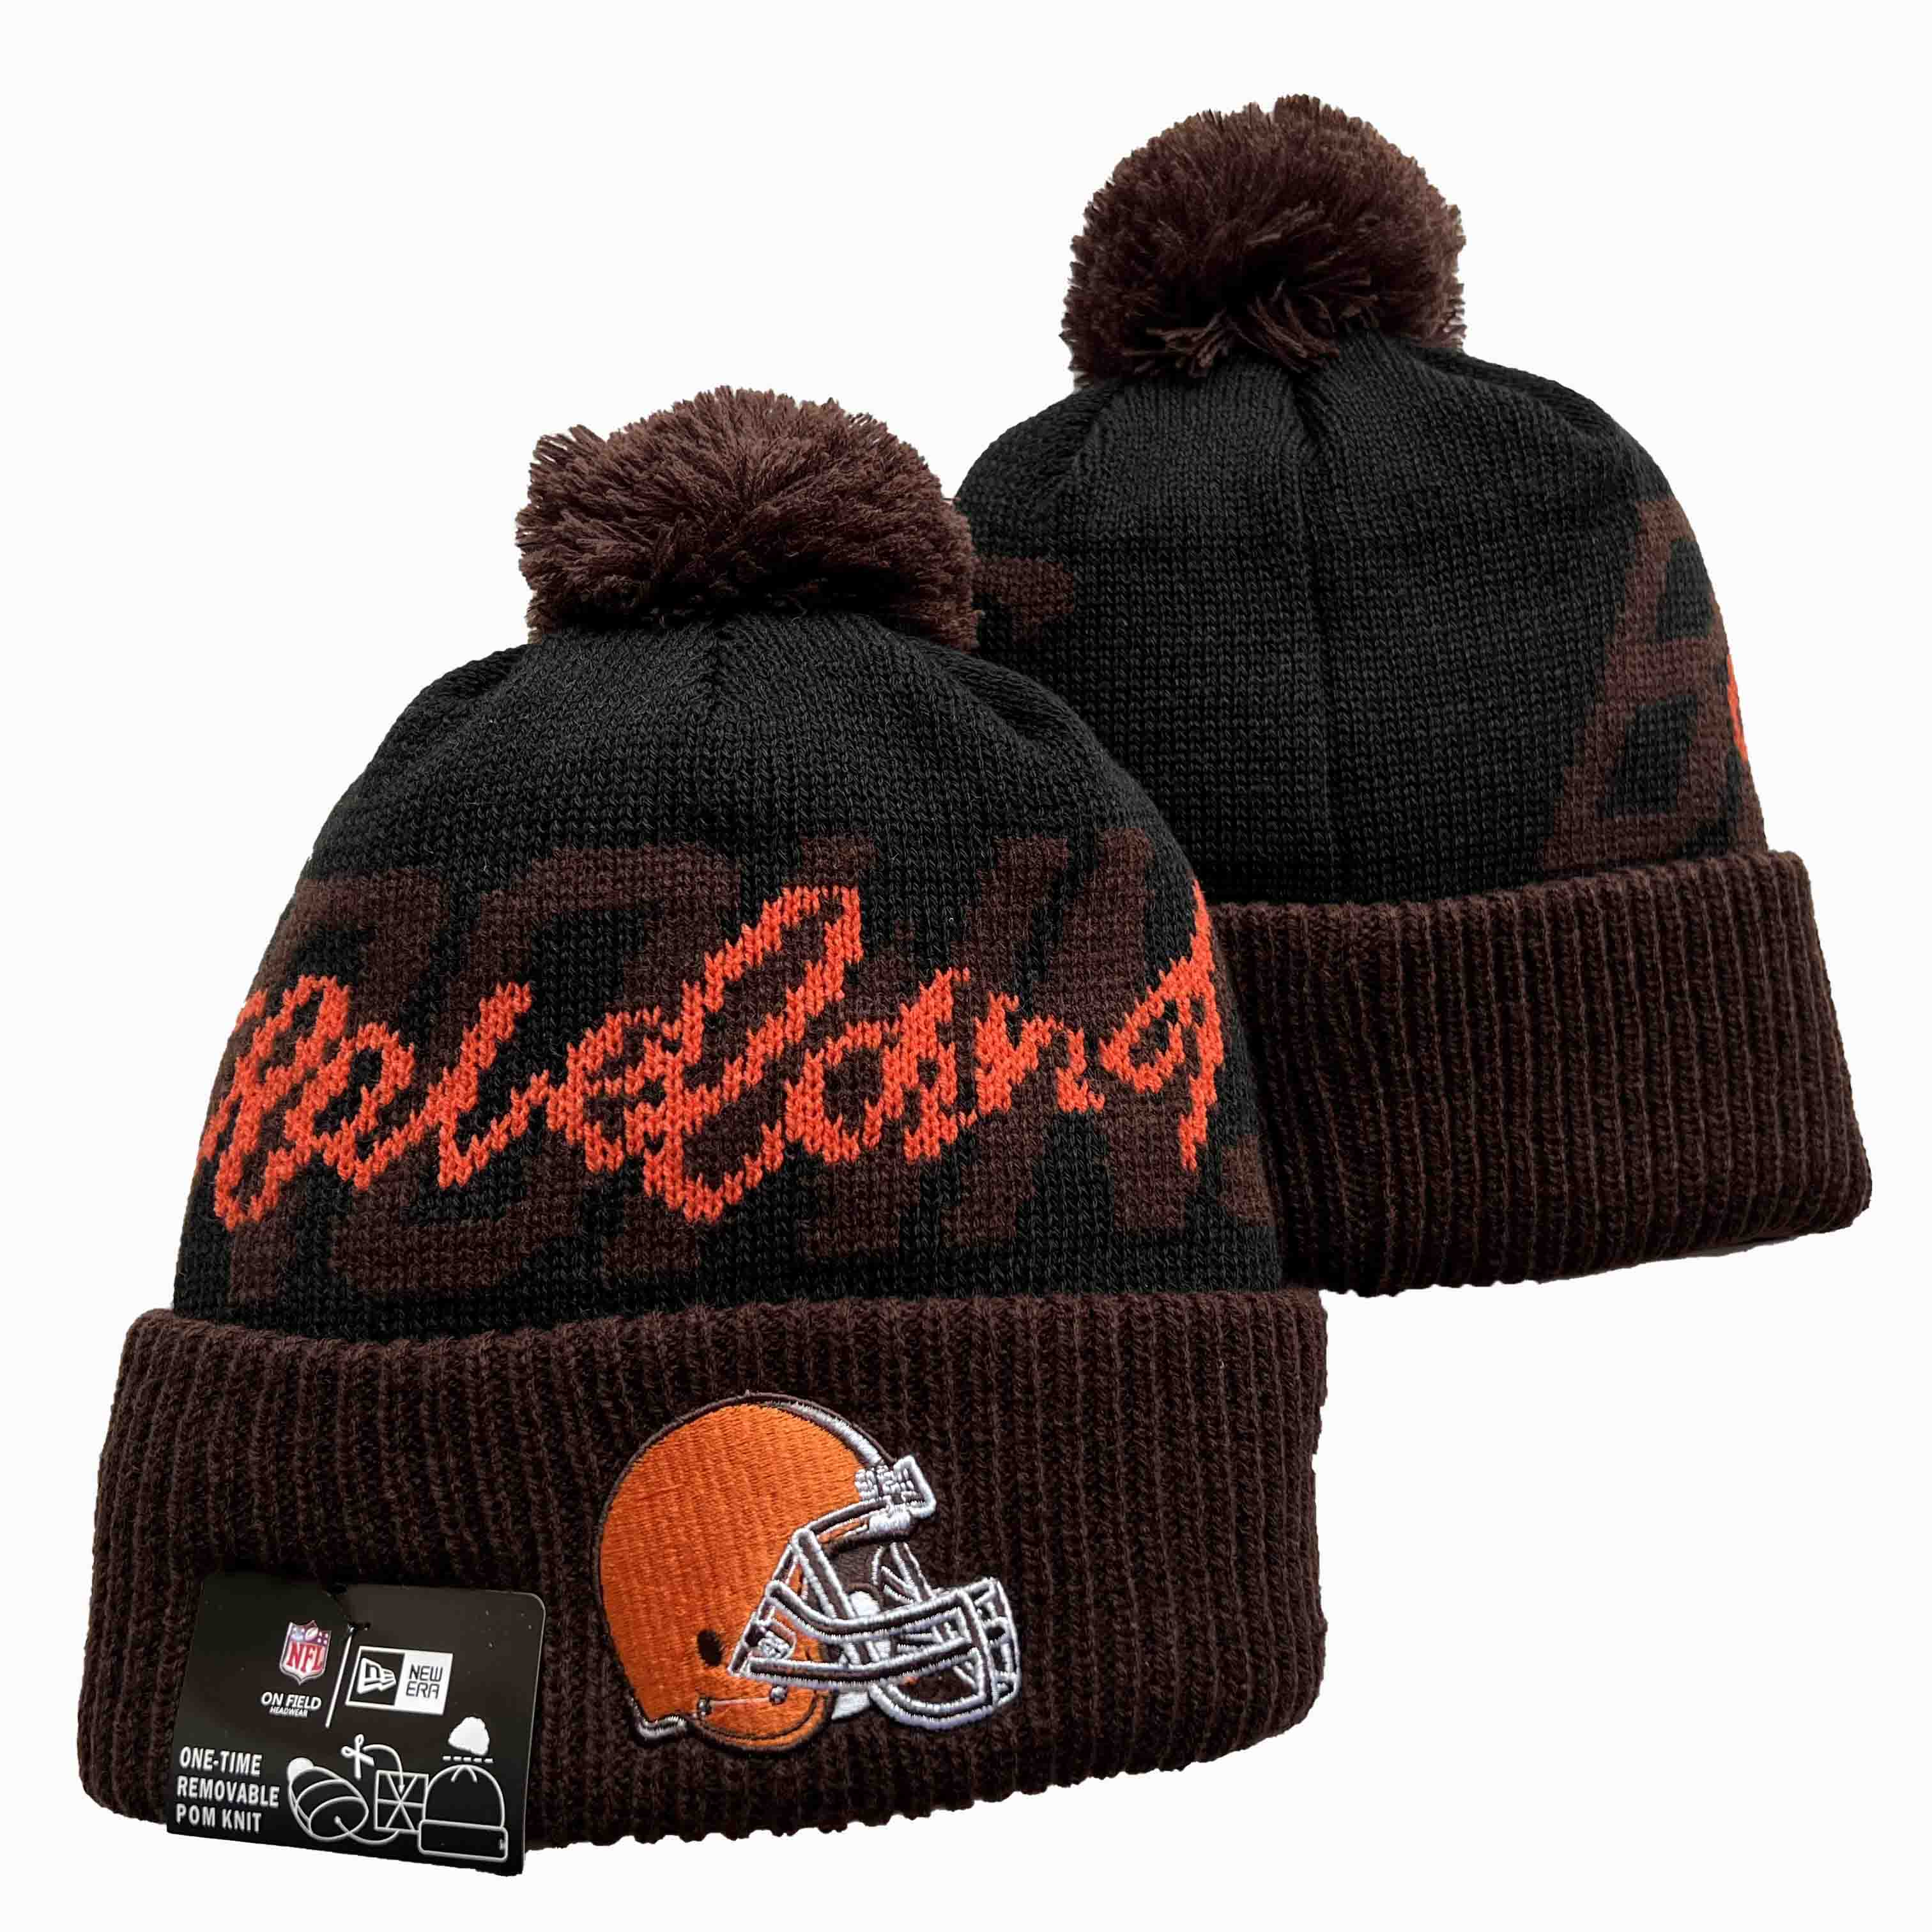 NFL Cleveland Browns Beanies Knit Hats-YD1294